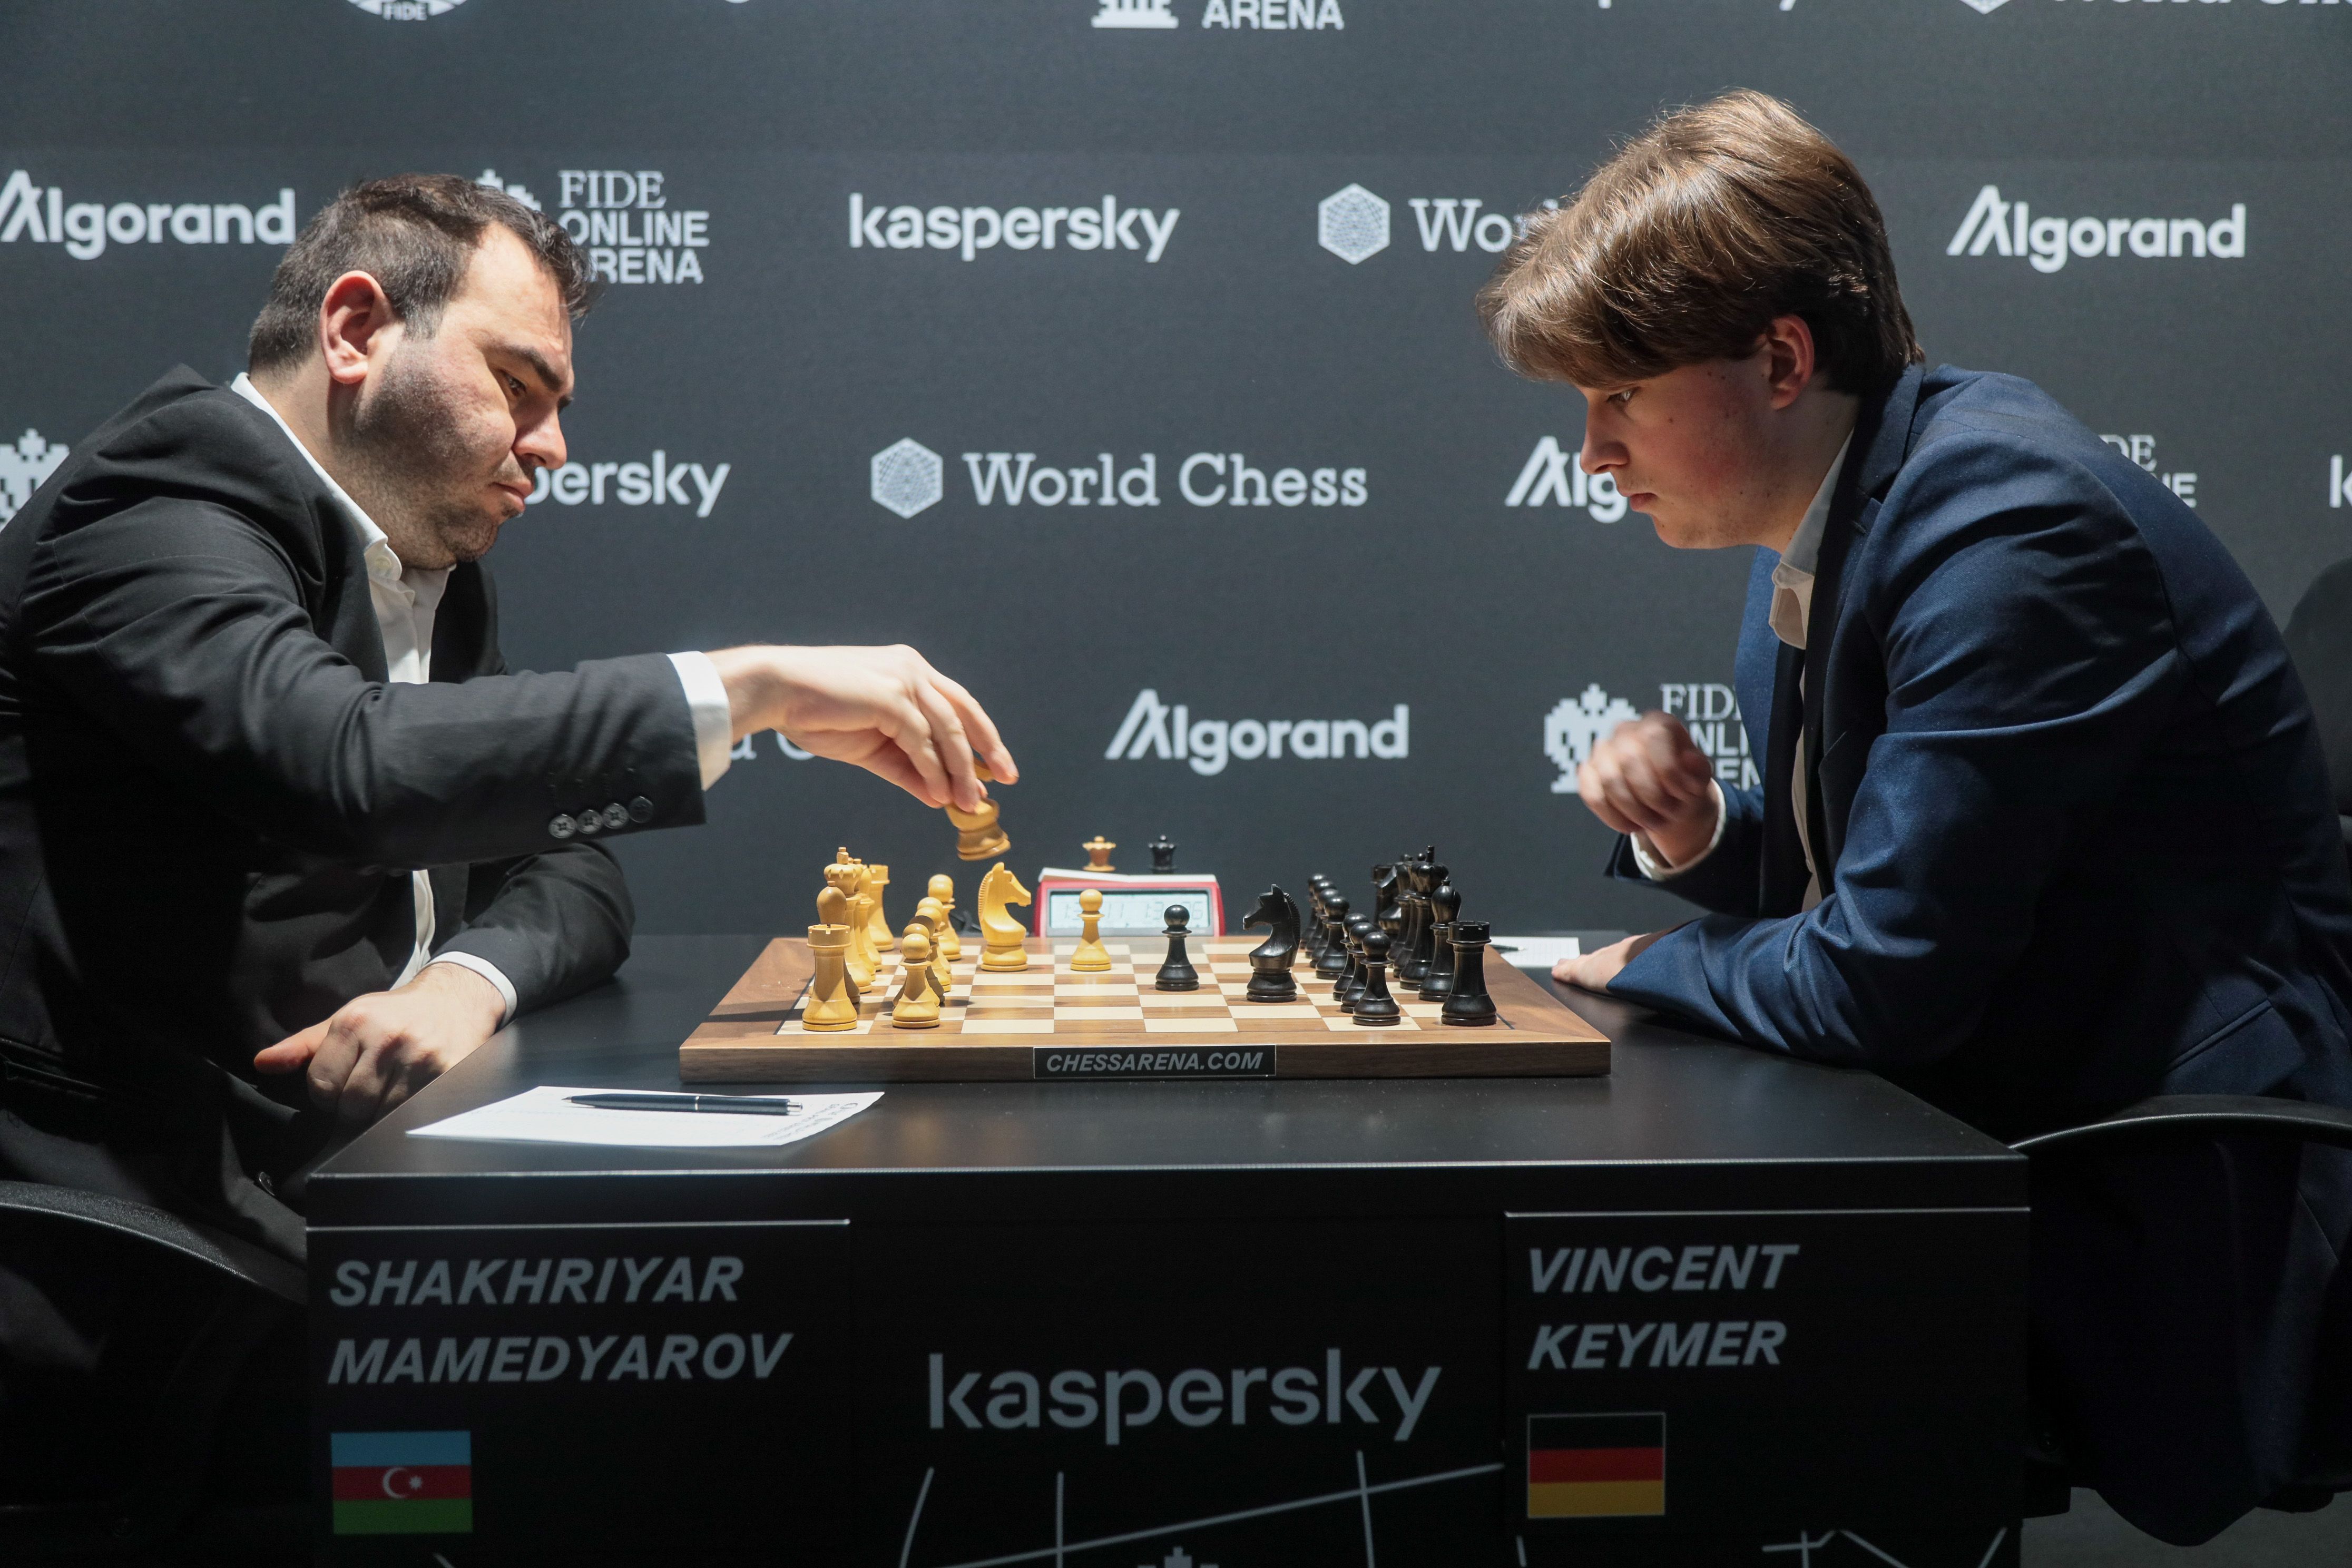 World Chess on X: 🔥🔥🔥 Minister of Defense of Latvia is making the first  move for THE Minister of Defense. #FIDEGRandPrix Follow the games live at    / X